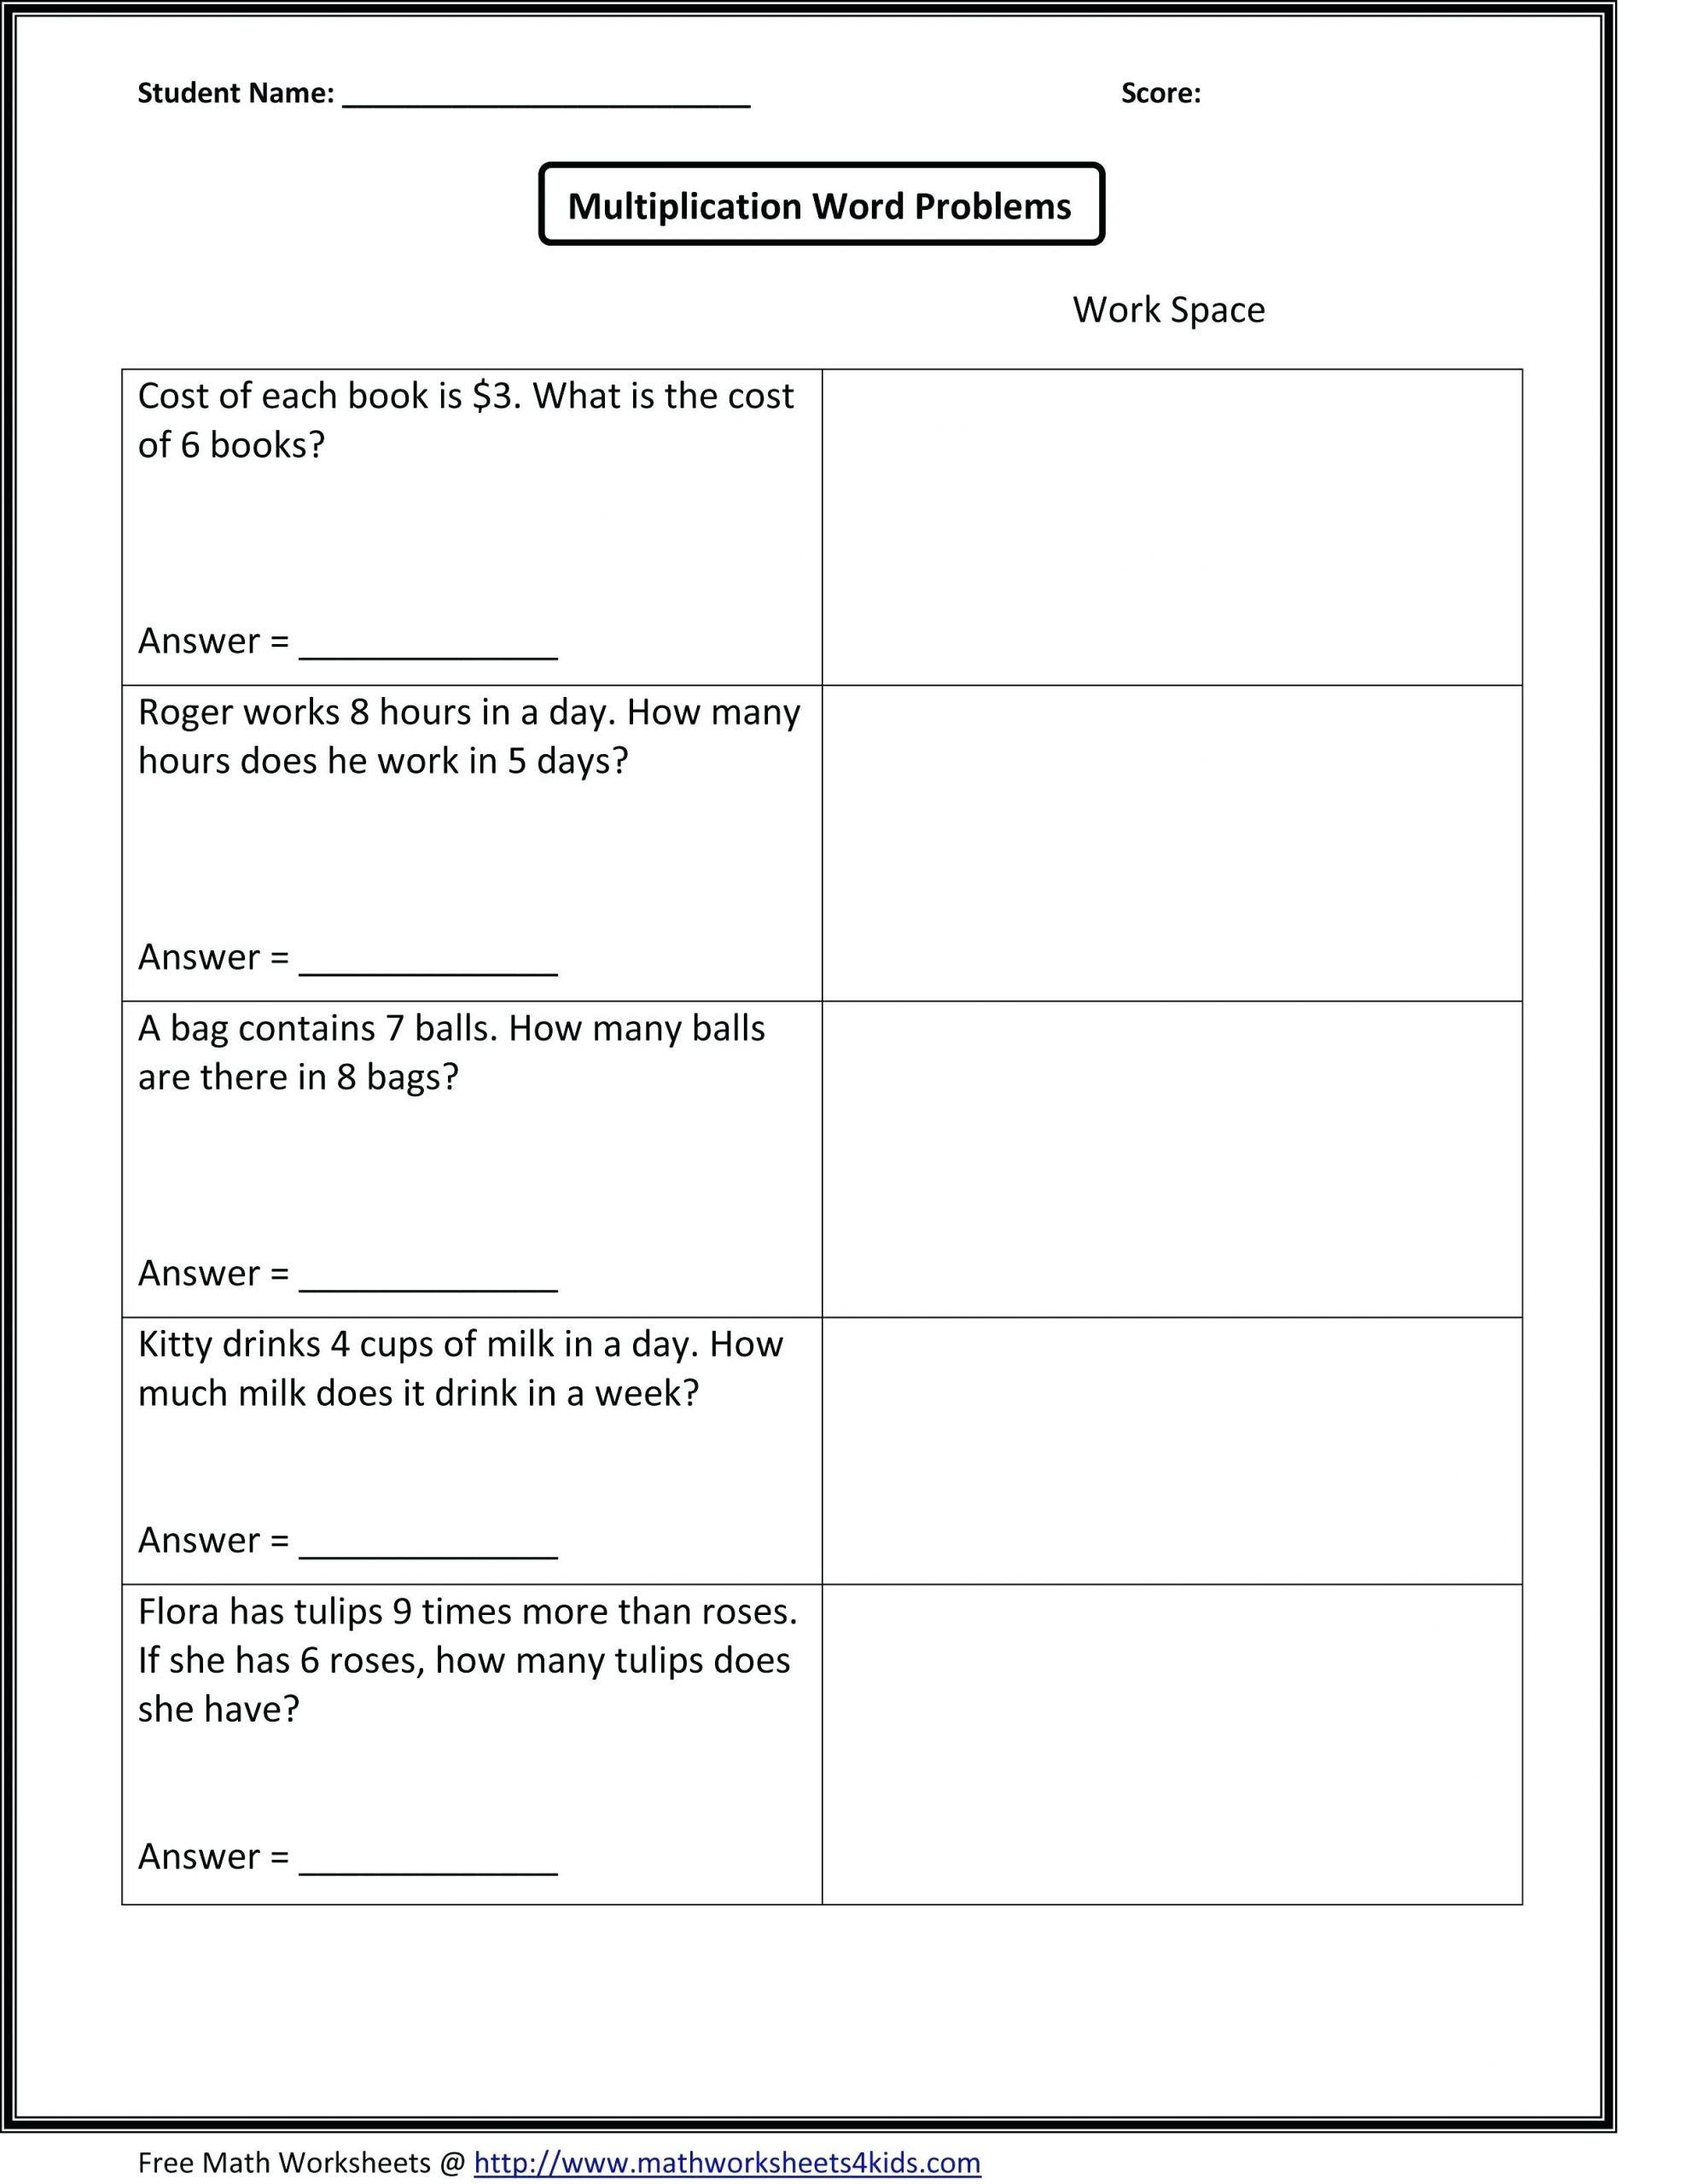 Free Math Worksheets Fifth Grade 5 Word Problems